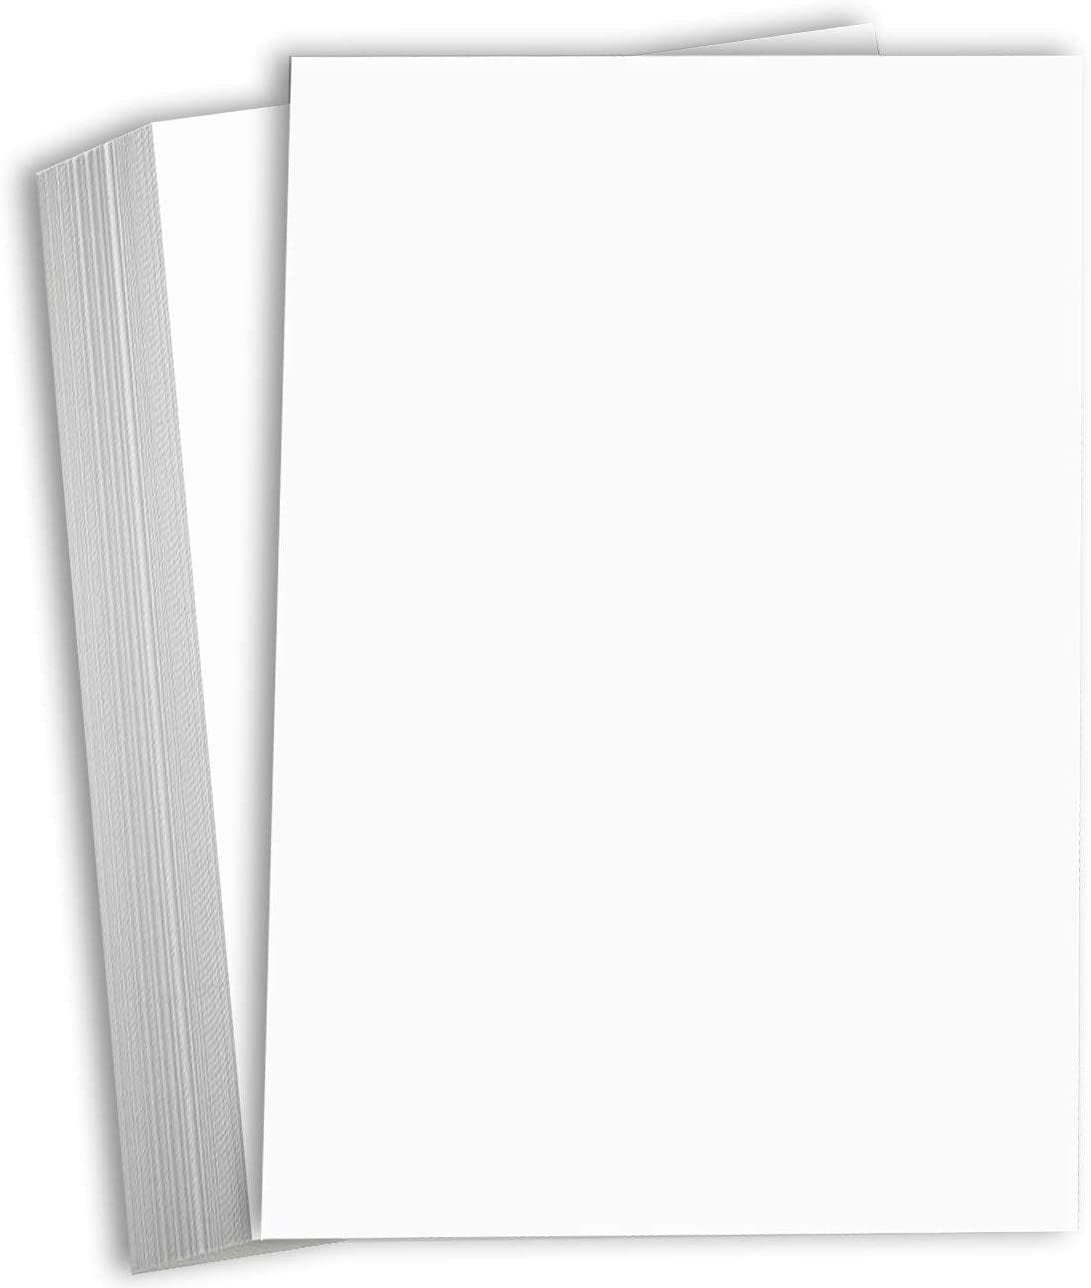 Greeting Invitations Stationary 5 X 7 Heavy weight 80 lb Card Stock 100 Pack Blank Index Flash Note & Post Cards with Rounded Corners Hamilco White Cardstock Thick Paper